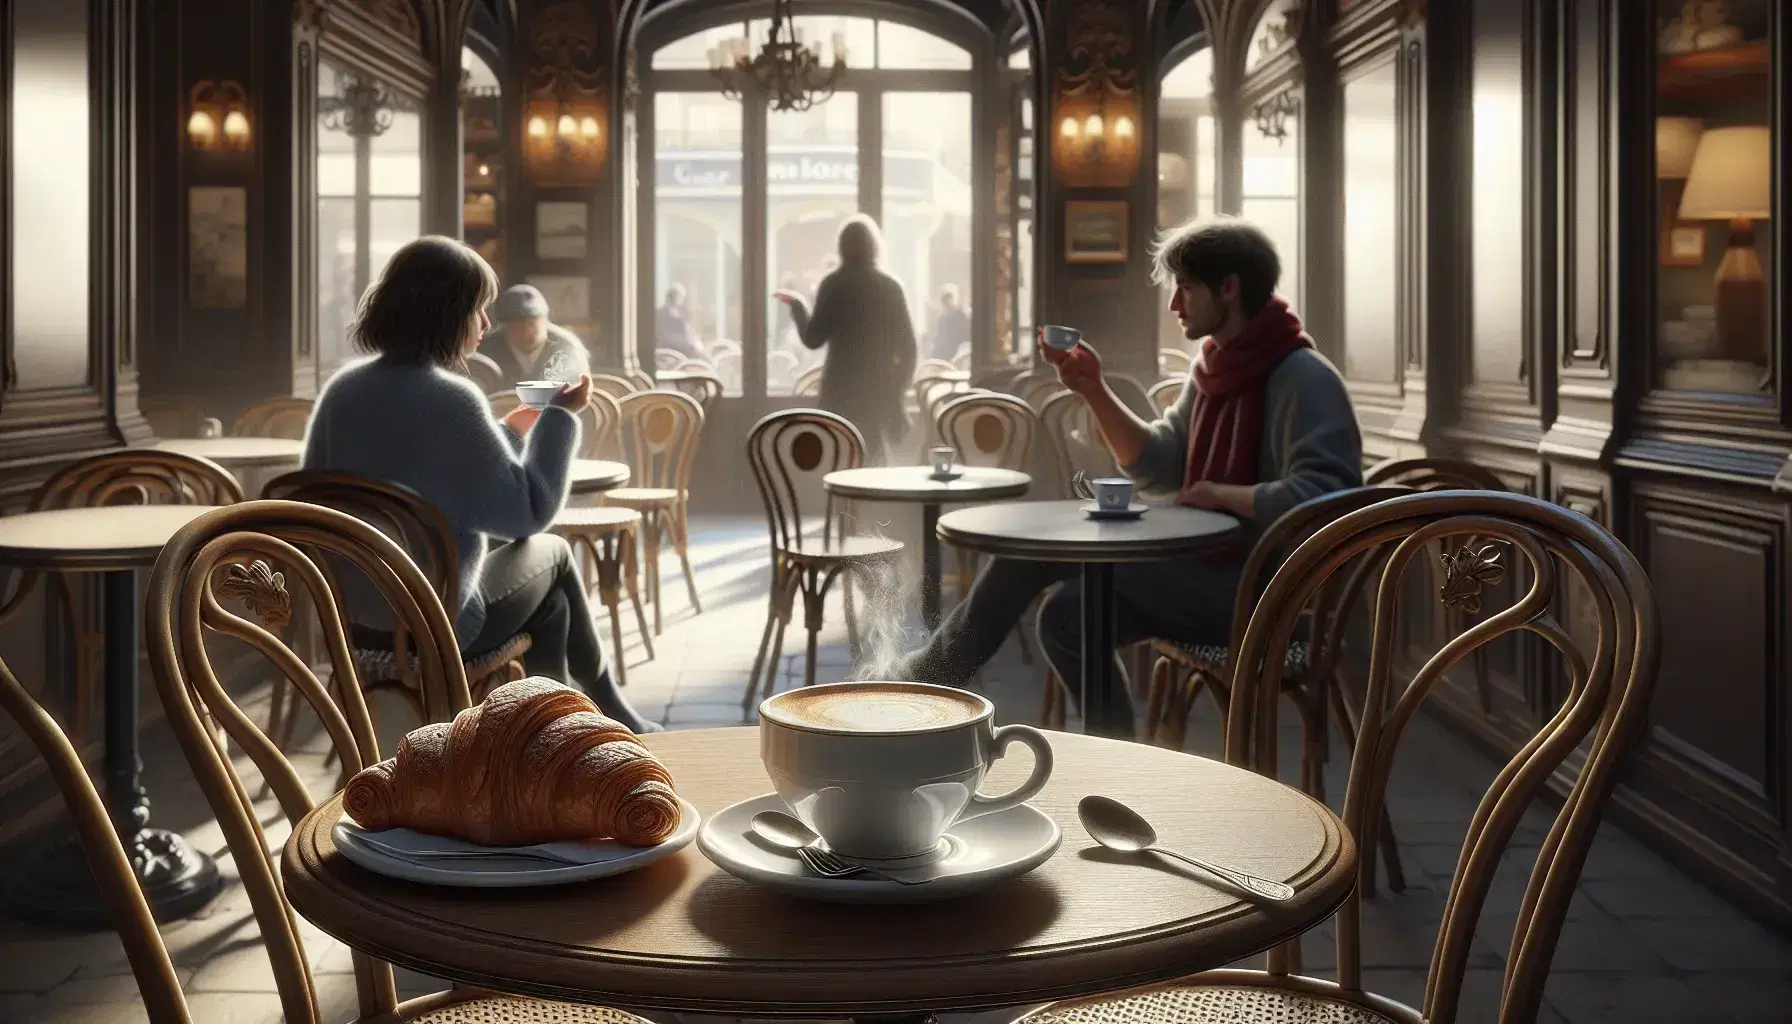 Cozy French café scene with patrons enjoying coffee, a croissant on a wooden table, and warm ambient lighting enhancing the tranquil atmosphere.